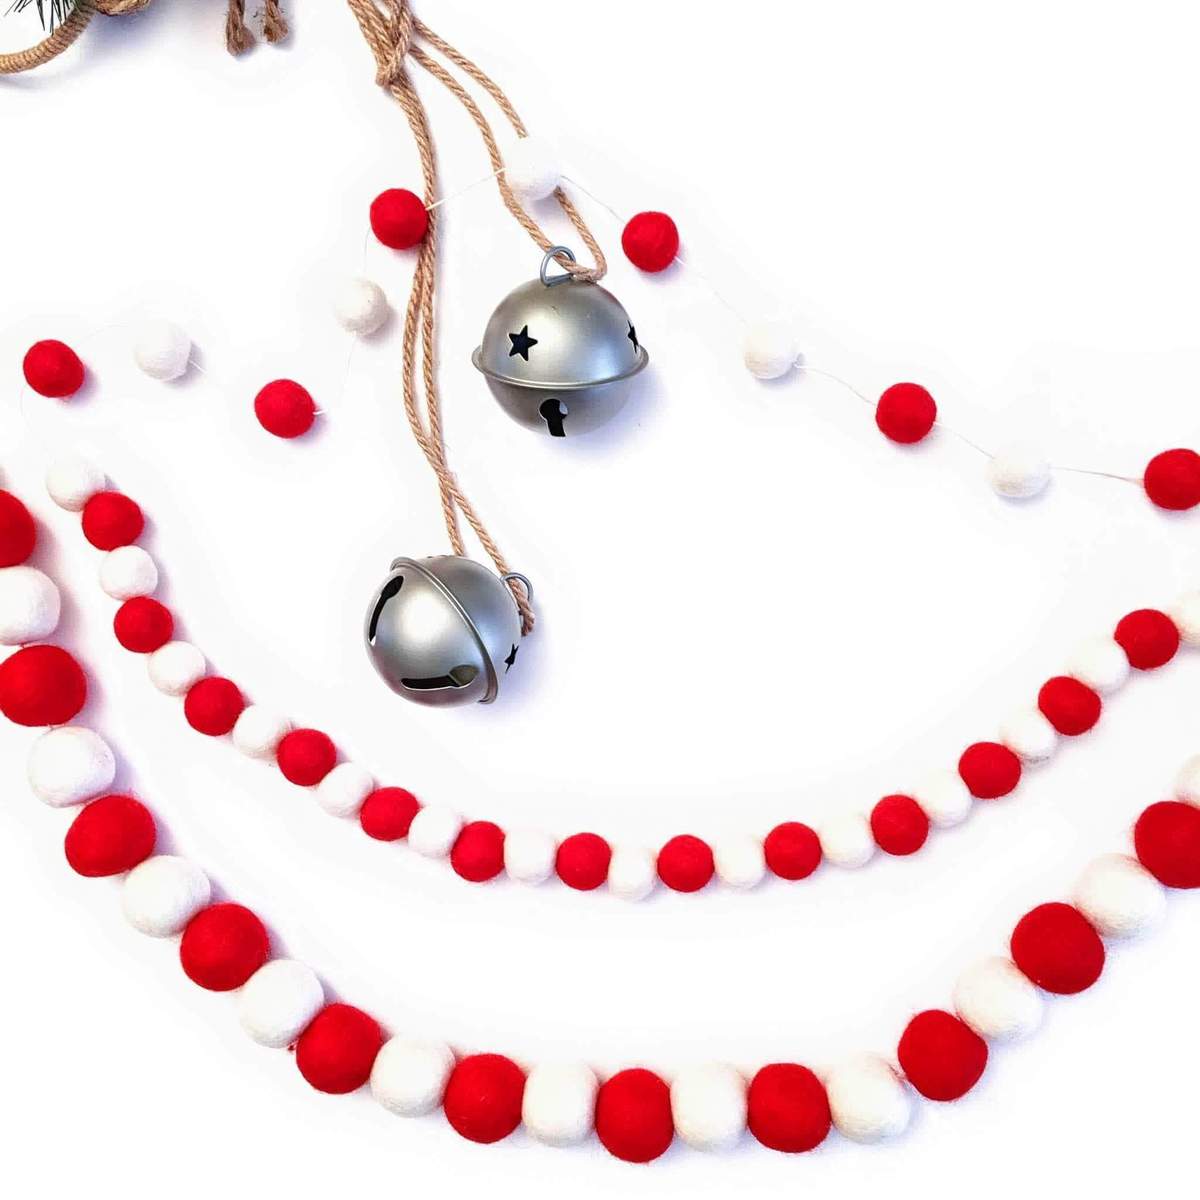 Candy Cane Eco Garlands/Ornaments